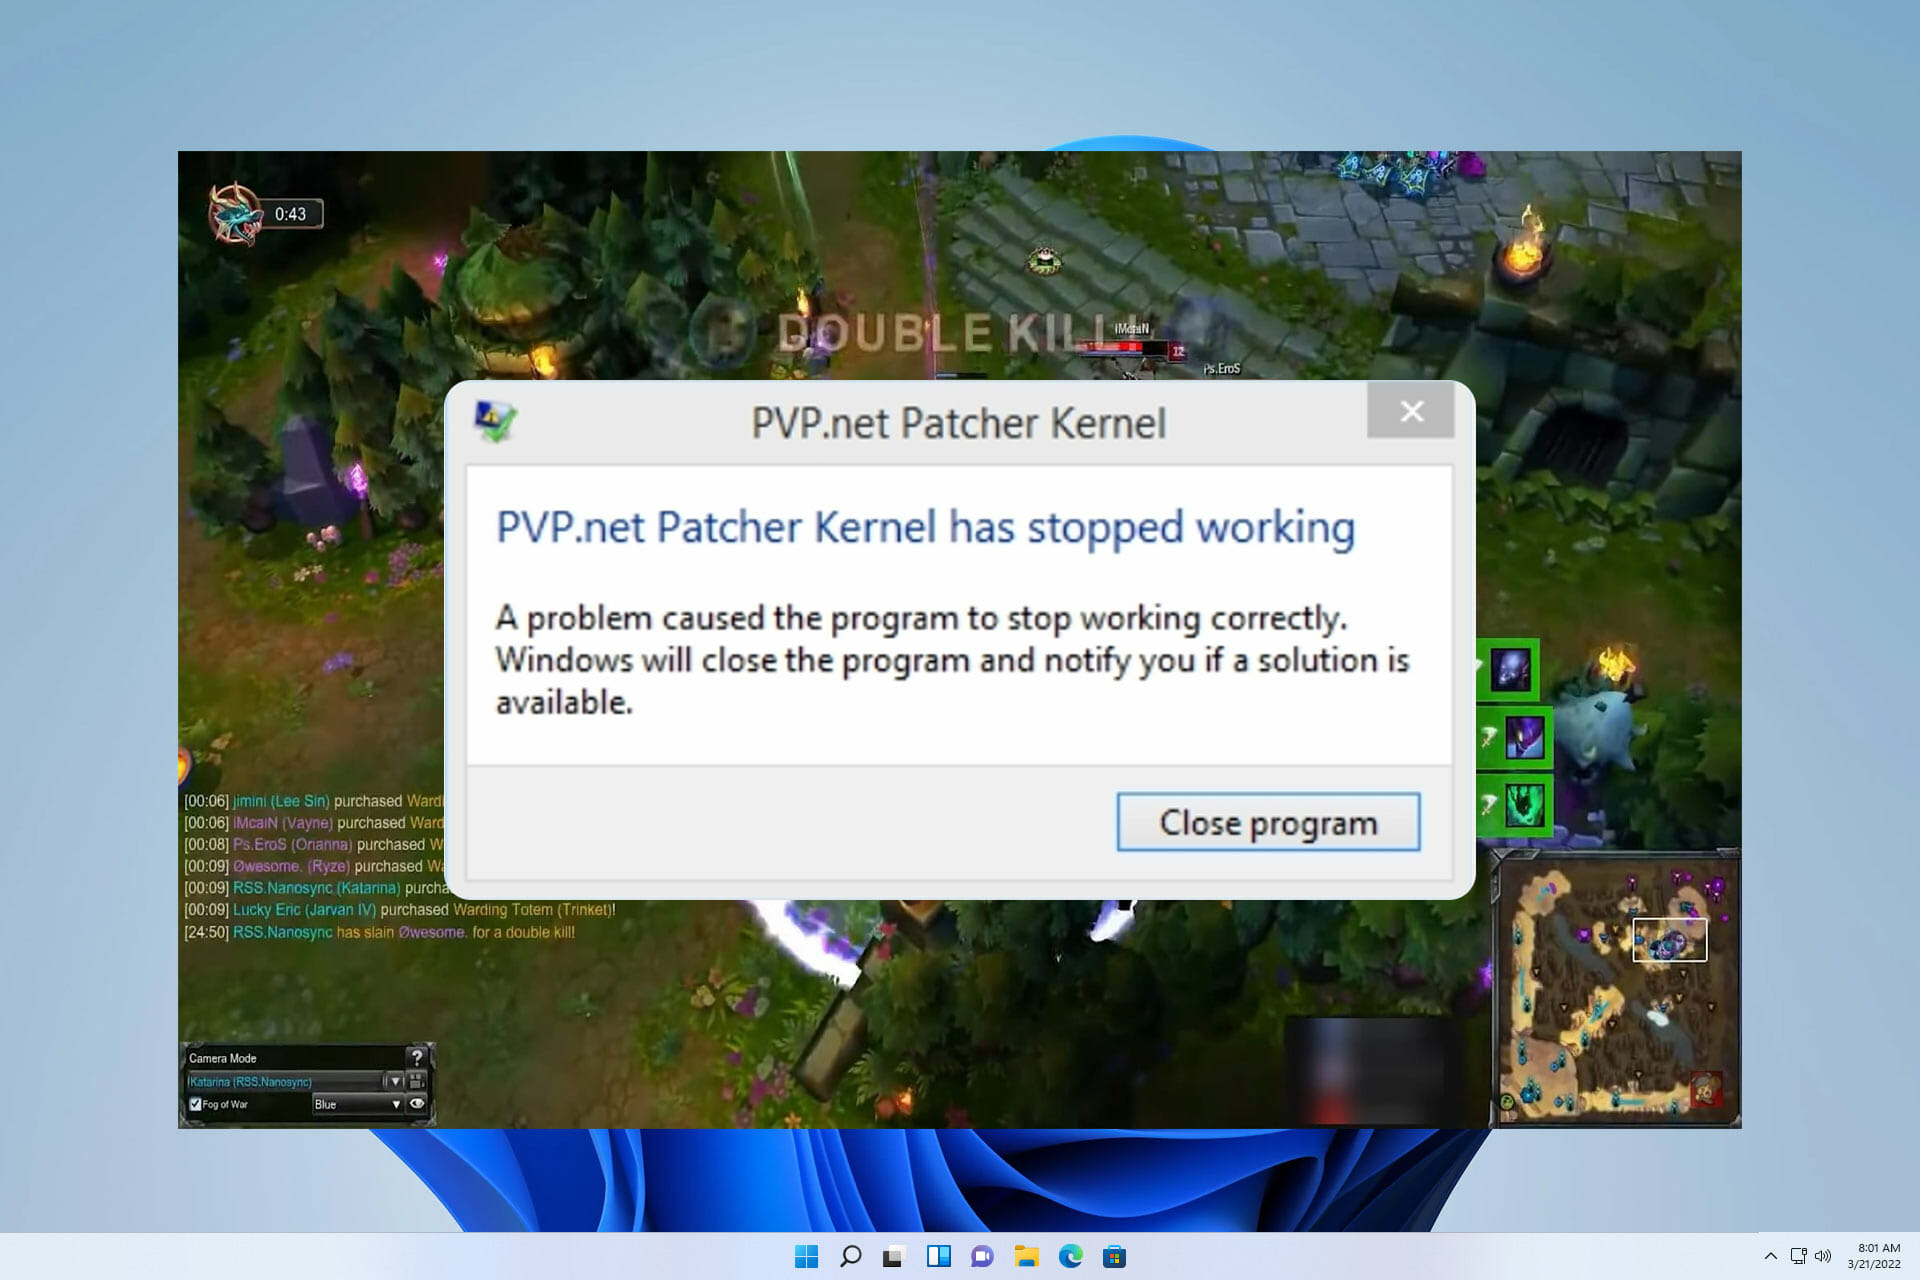 PVP.net patcher kernel has stopped working [3 tested solutions]